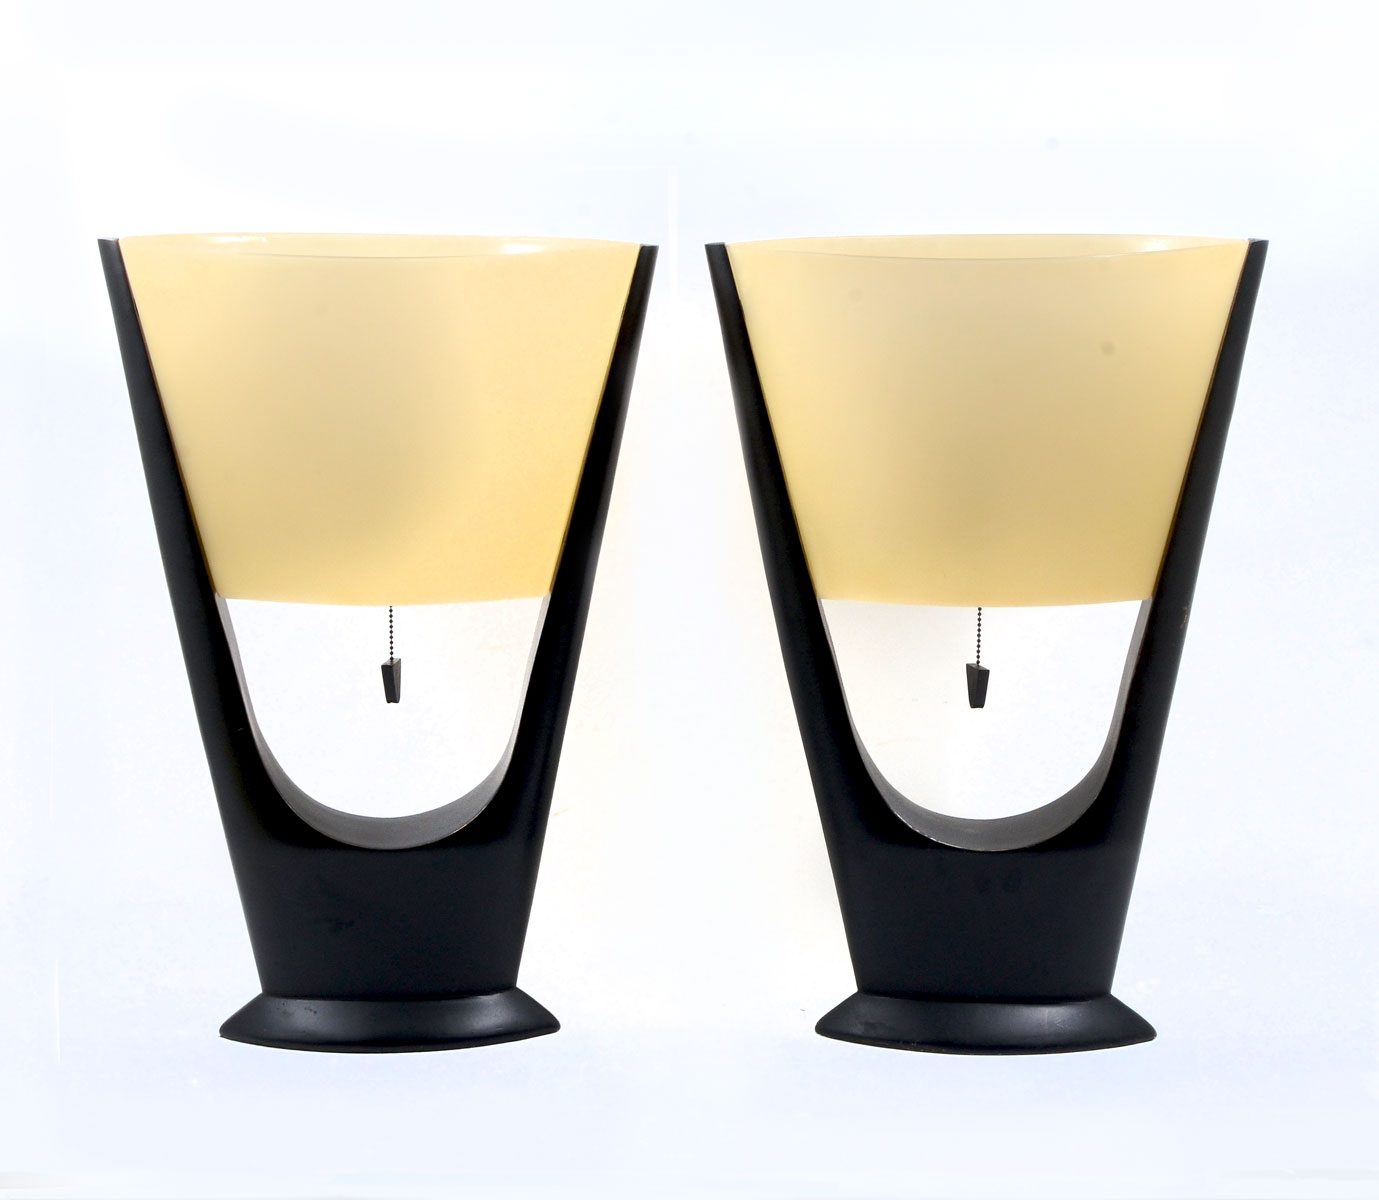 2 MODERN TABLE LAMPS Pair of single 36f35d